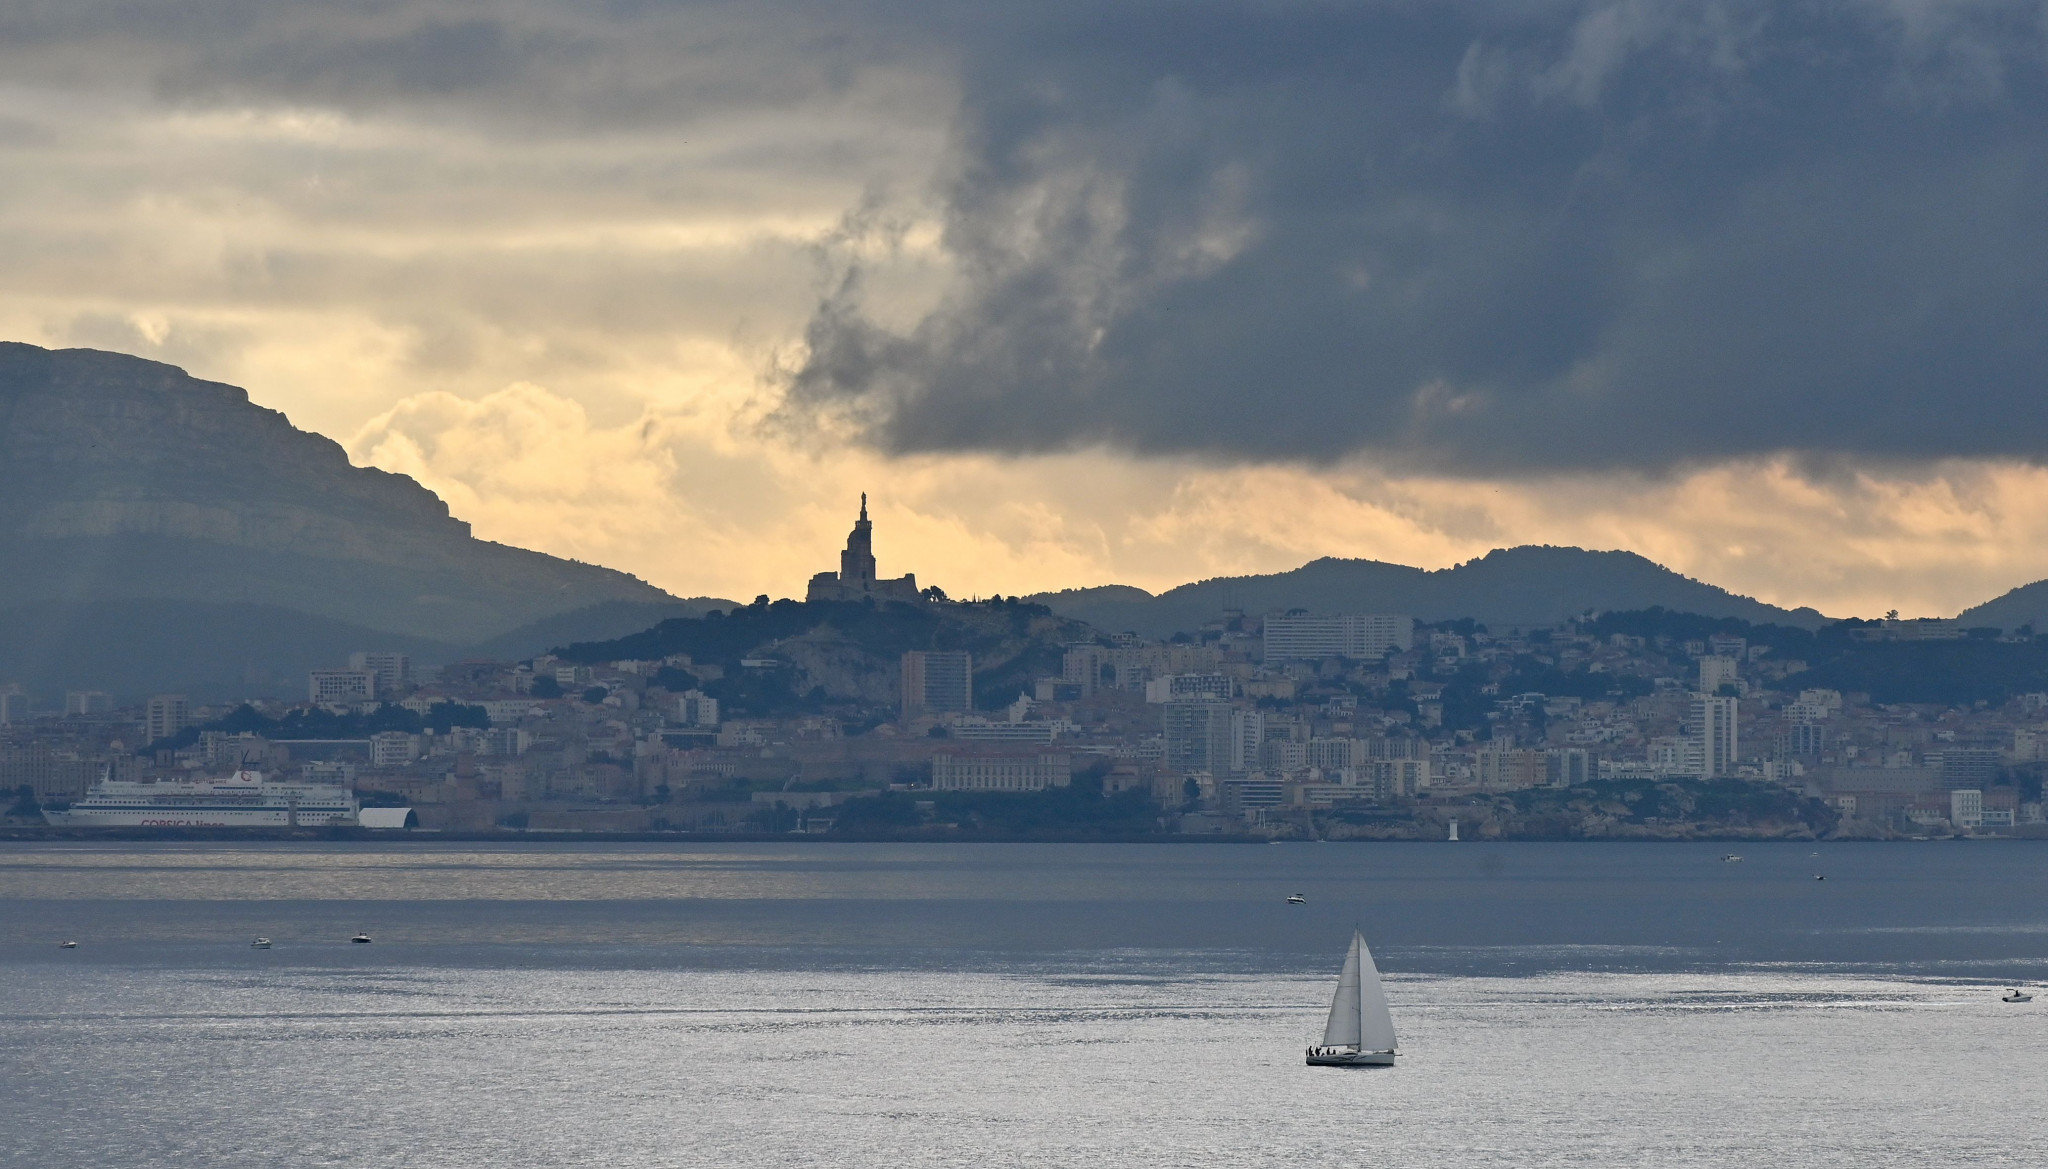 In the meeting, the World Sailing delegates outlined their plan for the sport at Paris 2024 which is set to take place in Marseille ©World Sailing